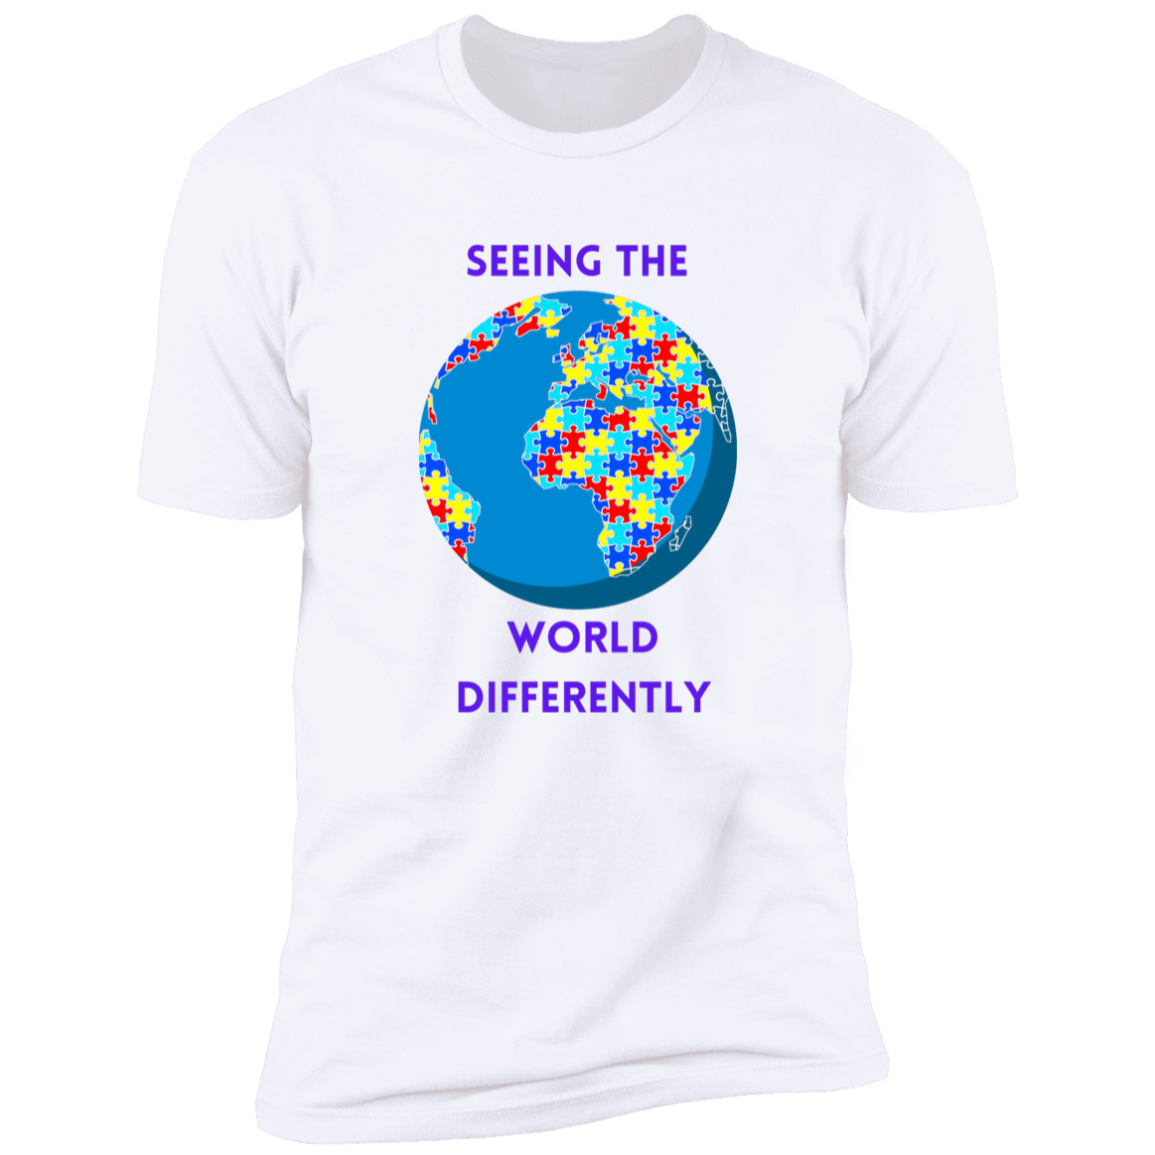 Seeing the World Differently Short Sleeve Shirt